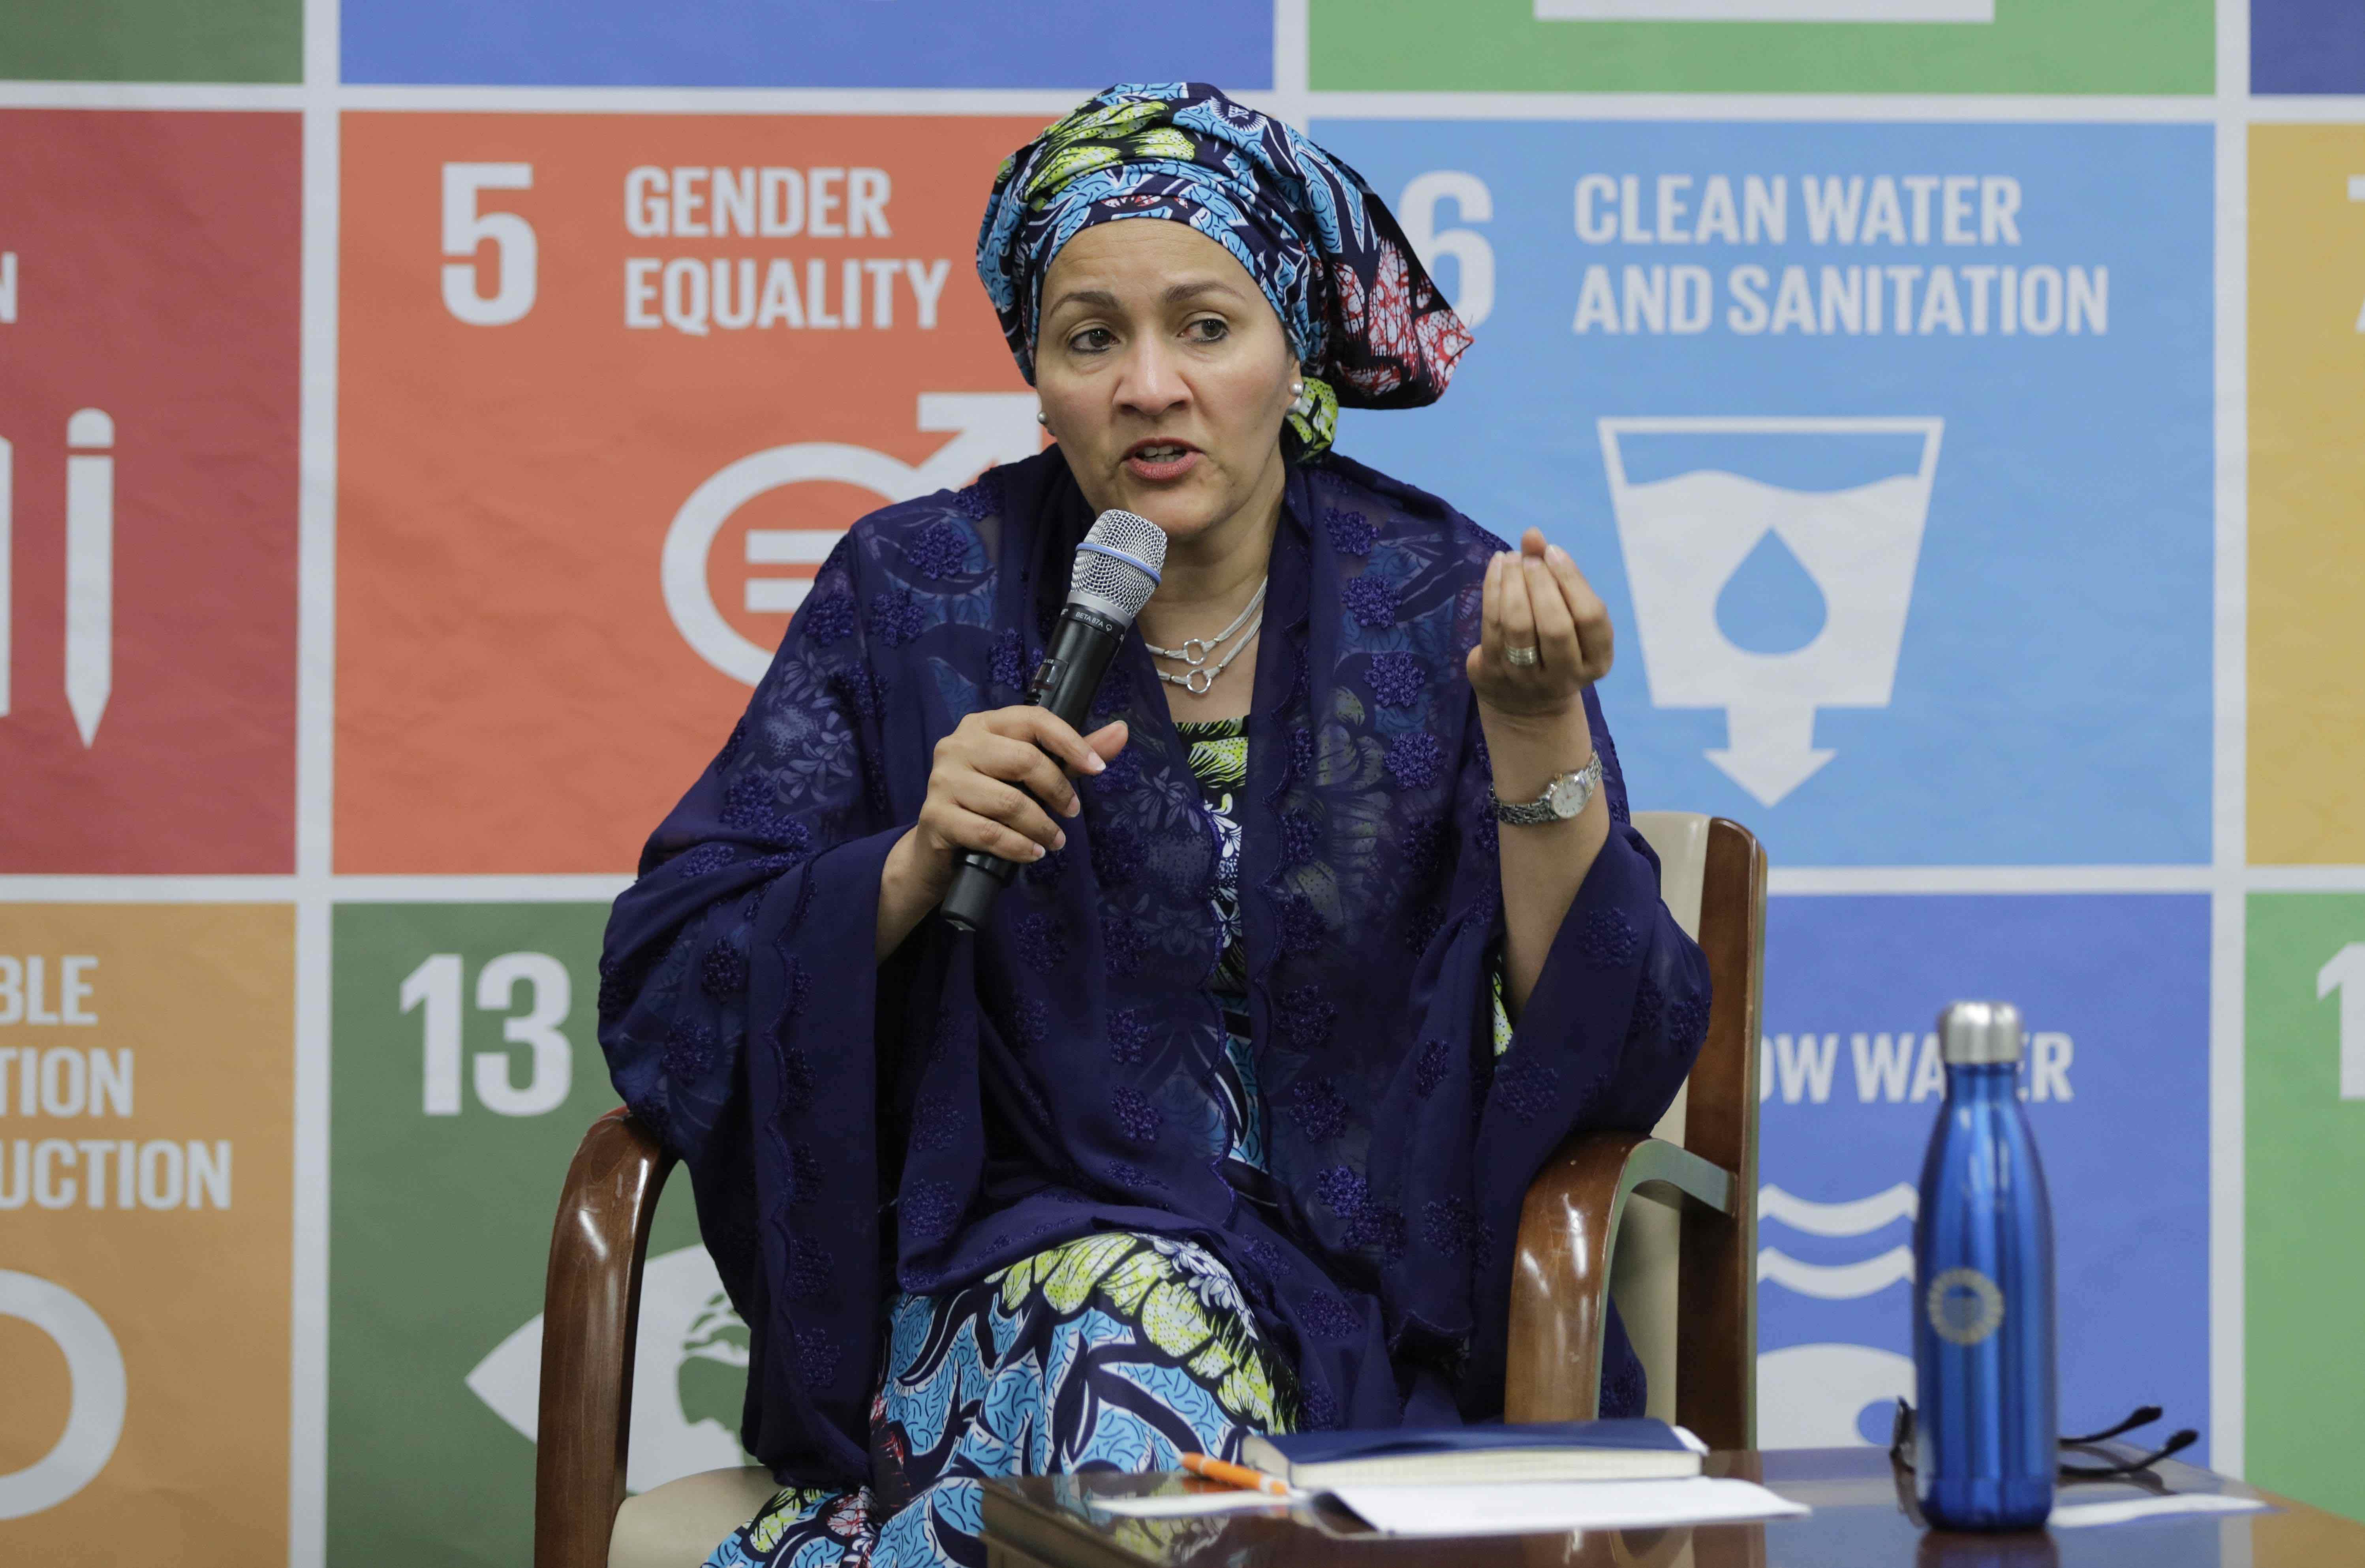 Wise Woman Amina Mohammed